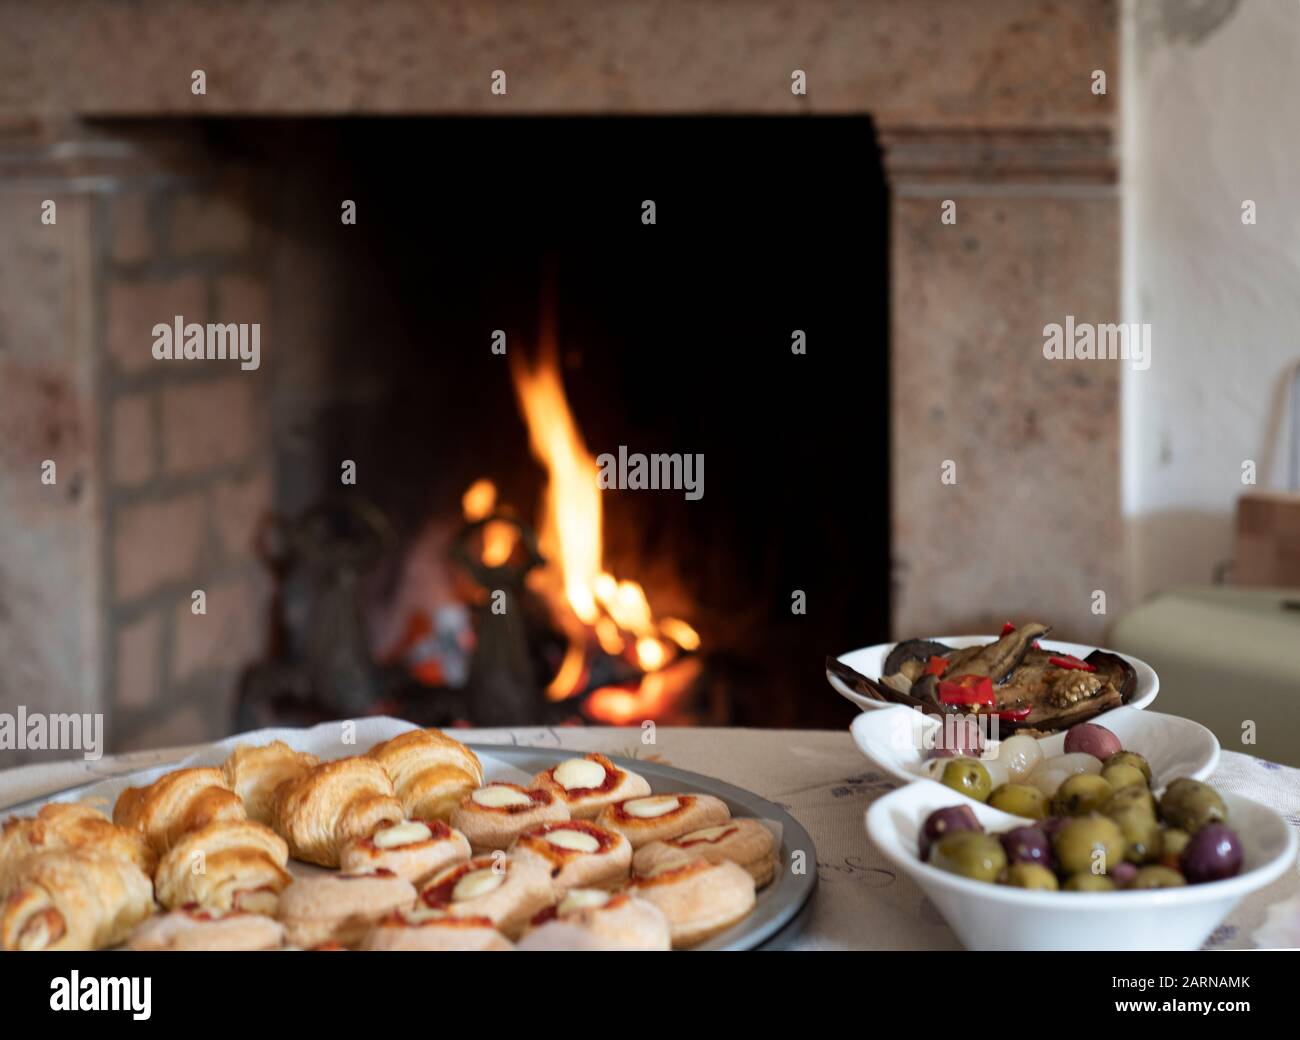 Plates of food and olives near a burning fire in a brick hearth indoors in close up with focus to the food Stock Photo